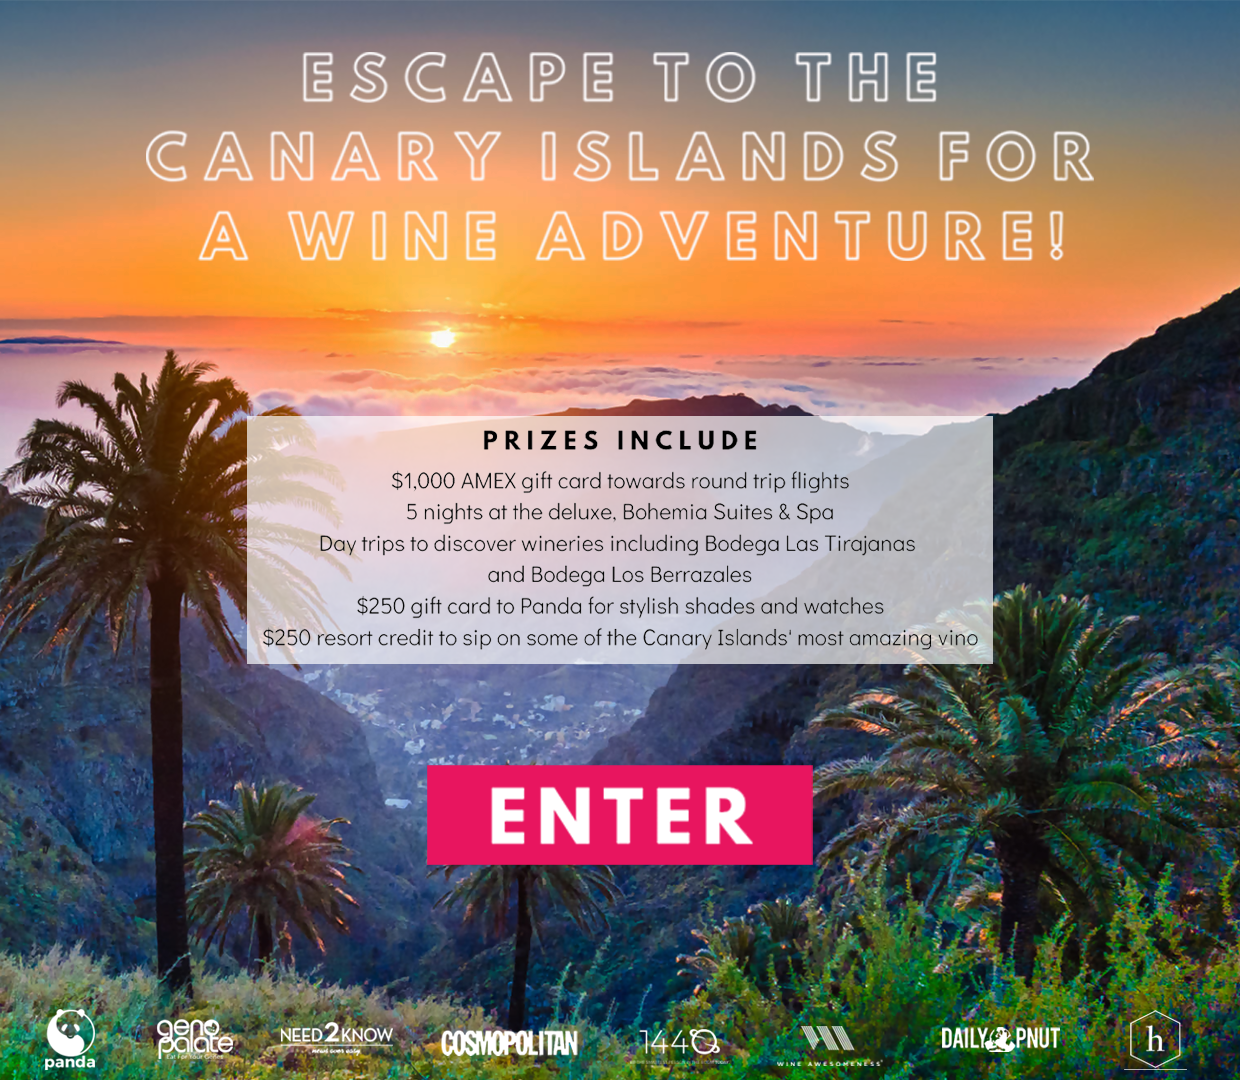 Escape to the Canary Islands for a Wine Adventure! Live on island time, escape to gorgeaus beaches, and sip delectable wine for 5 nights. Enter now!